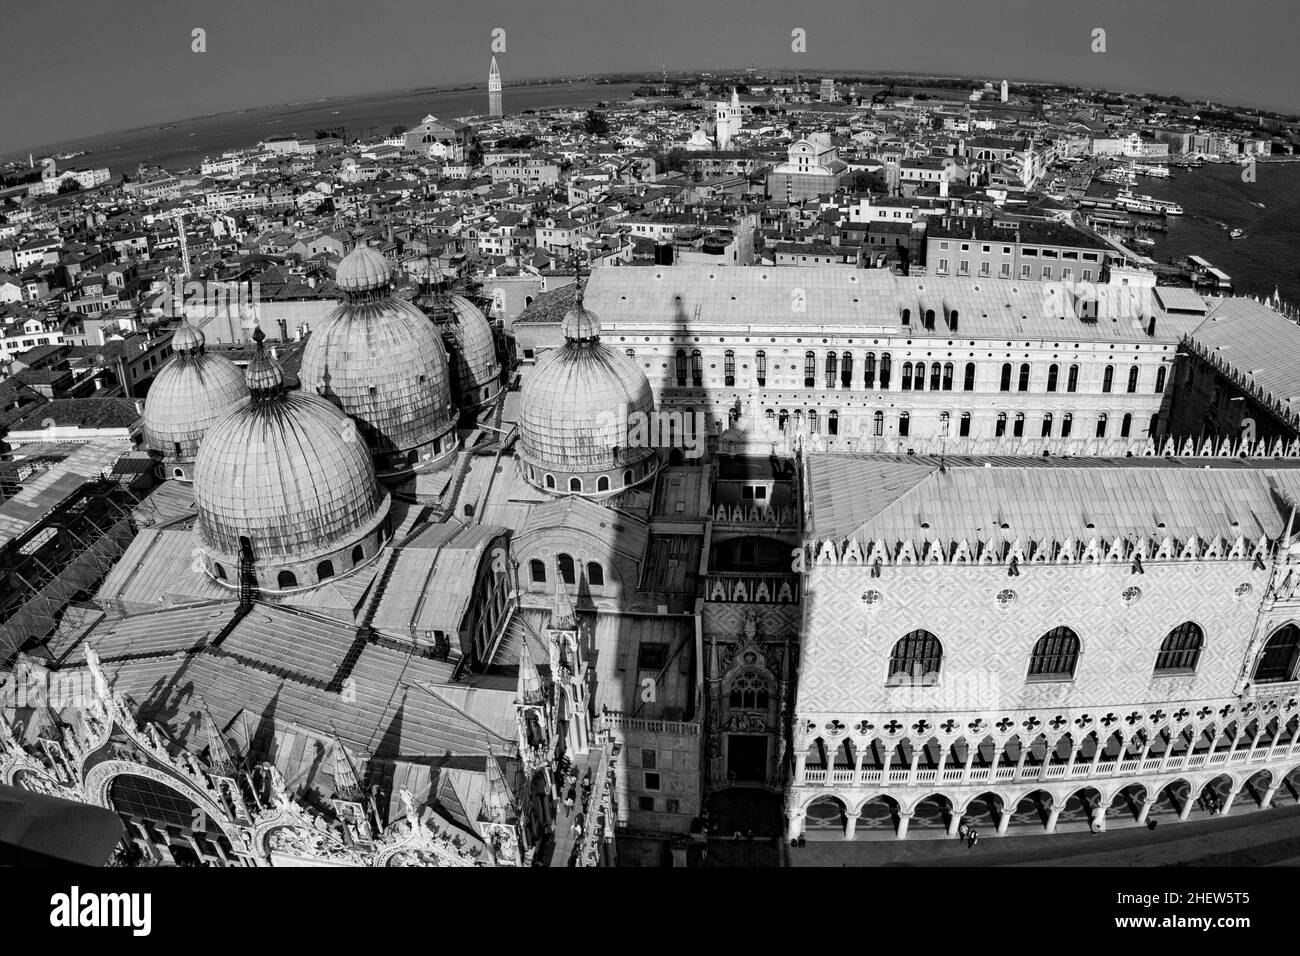 skyline of venice seen from san marco tower Stock Photo